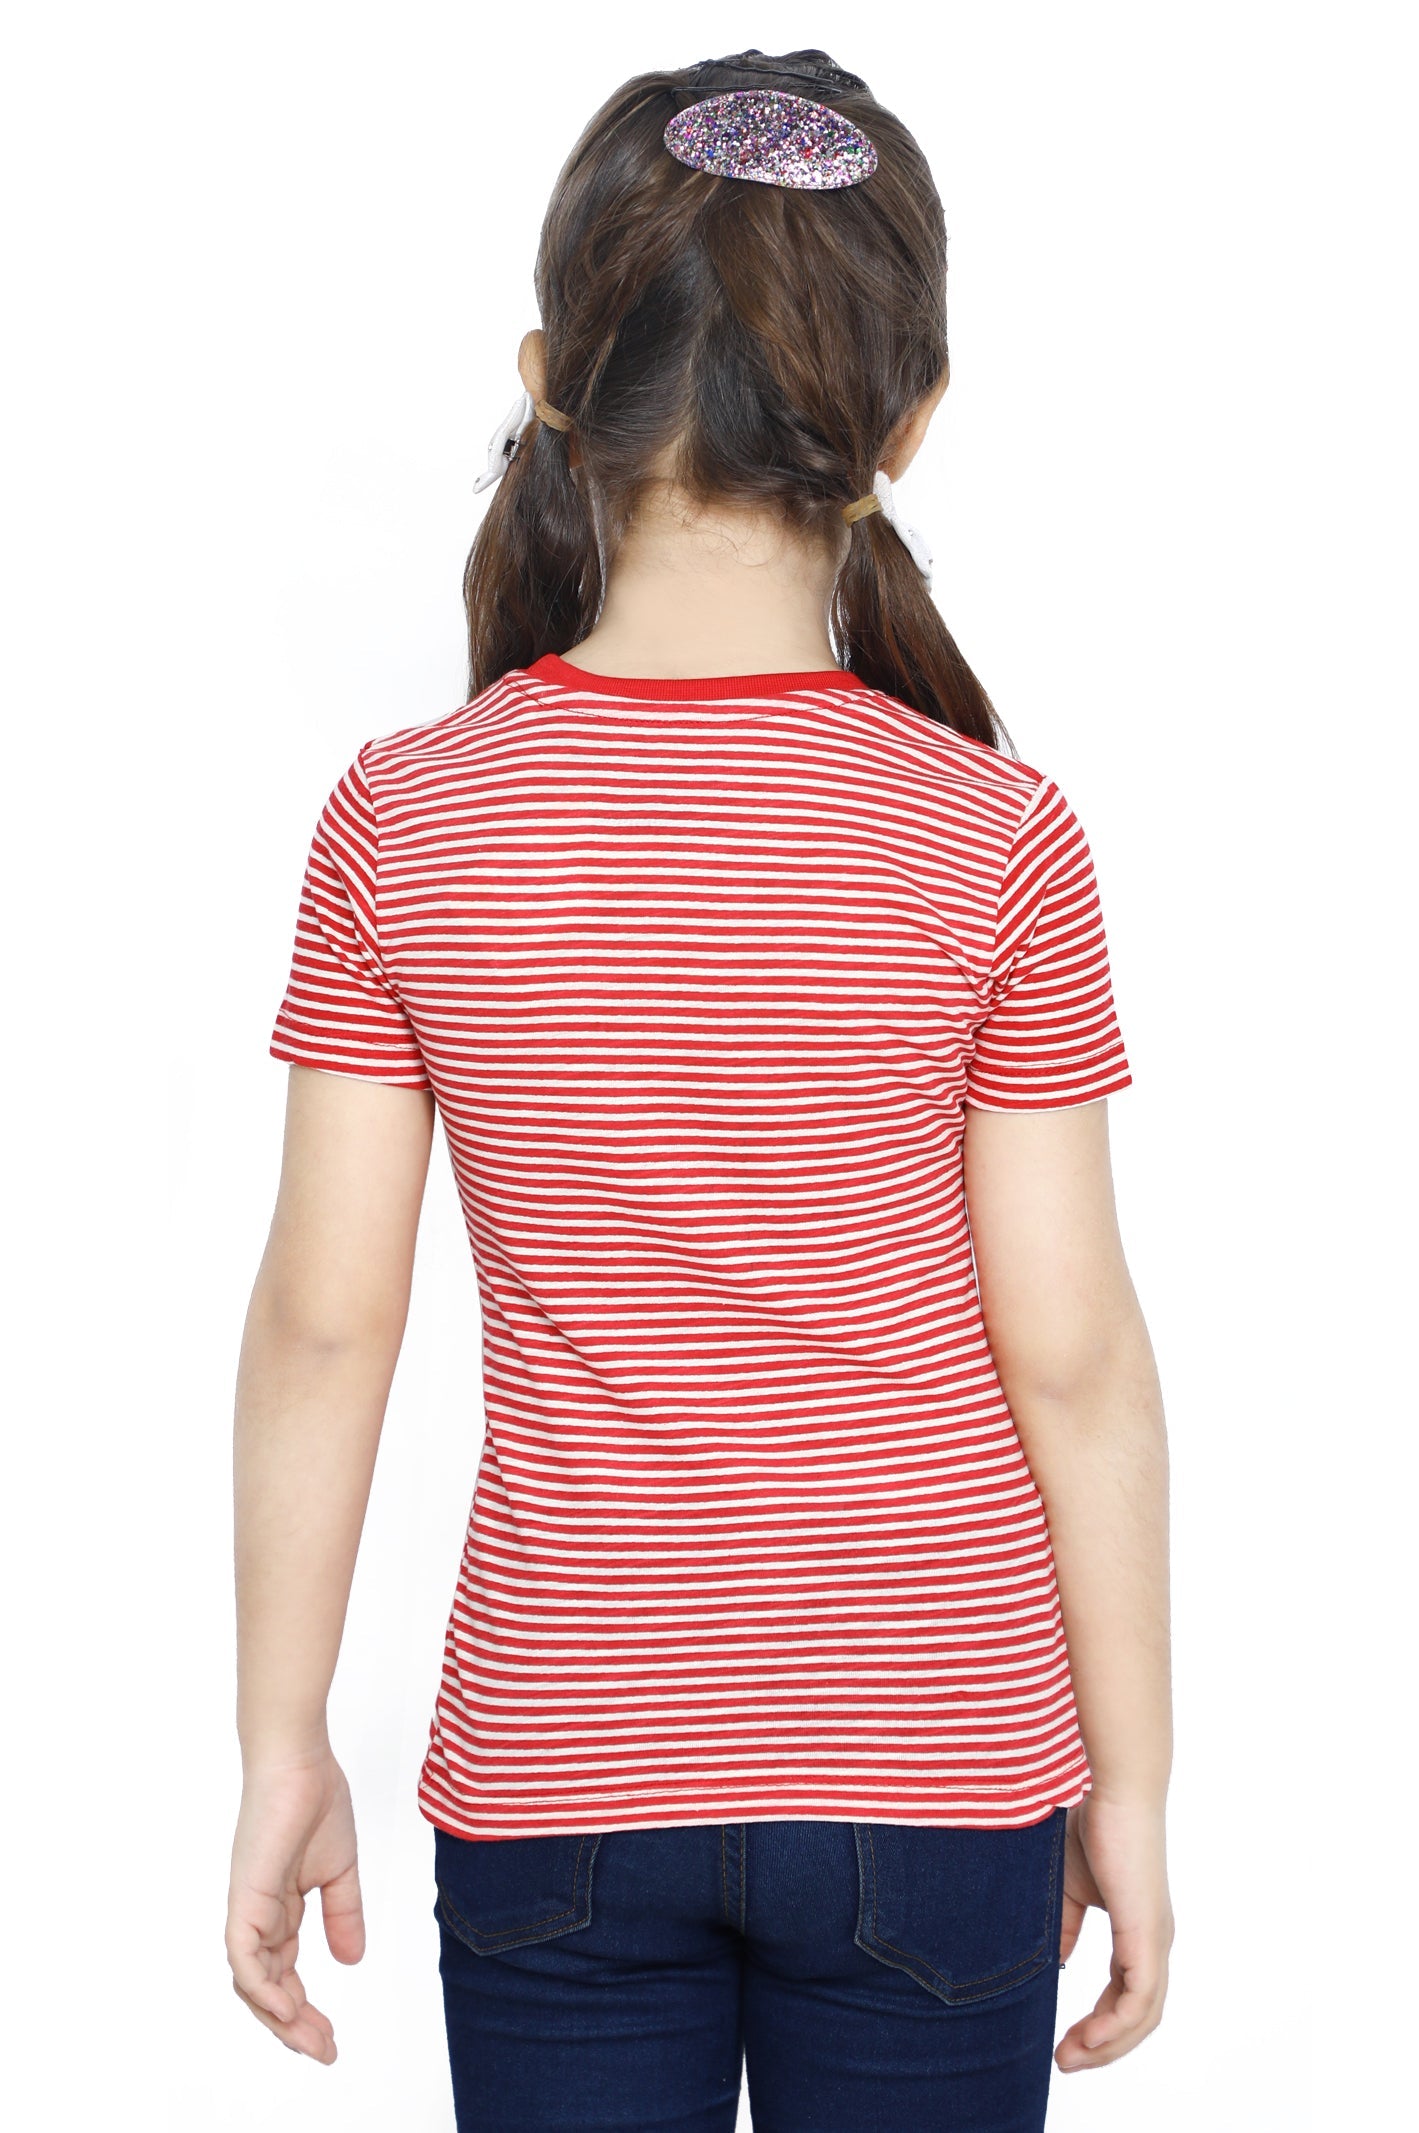 Girls T-Shirt In Red SKU: KGA-0196-RED - Diners